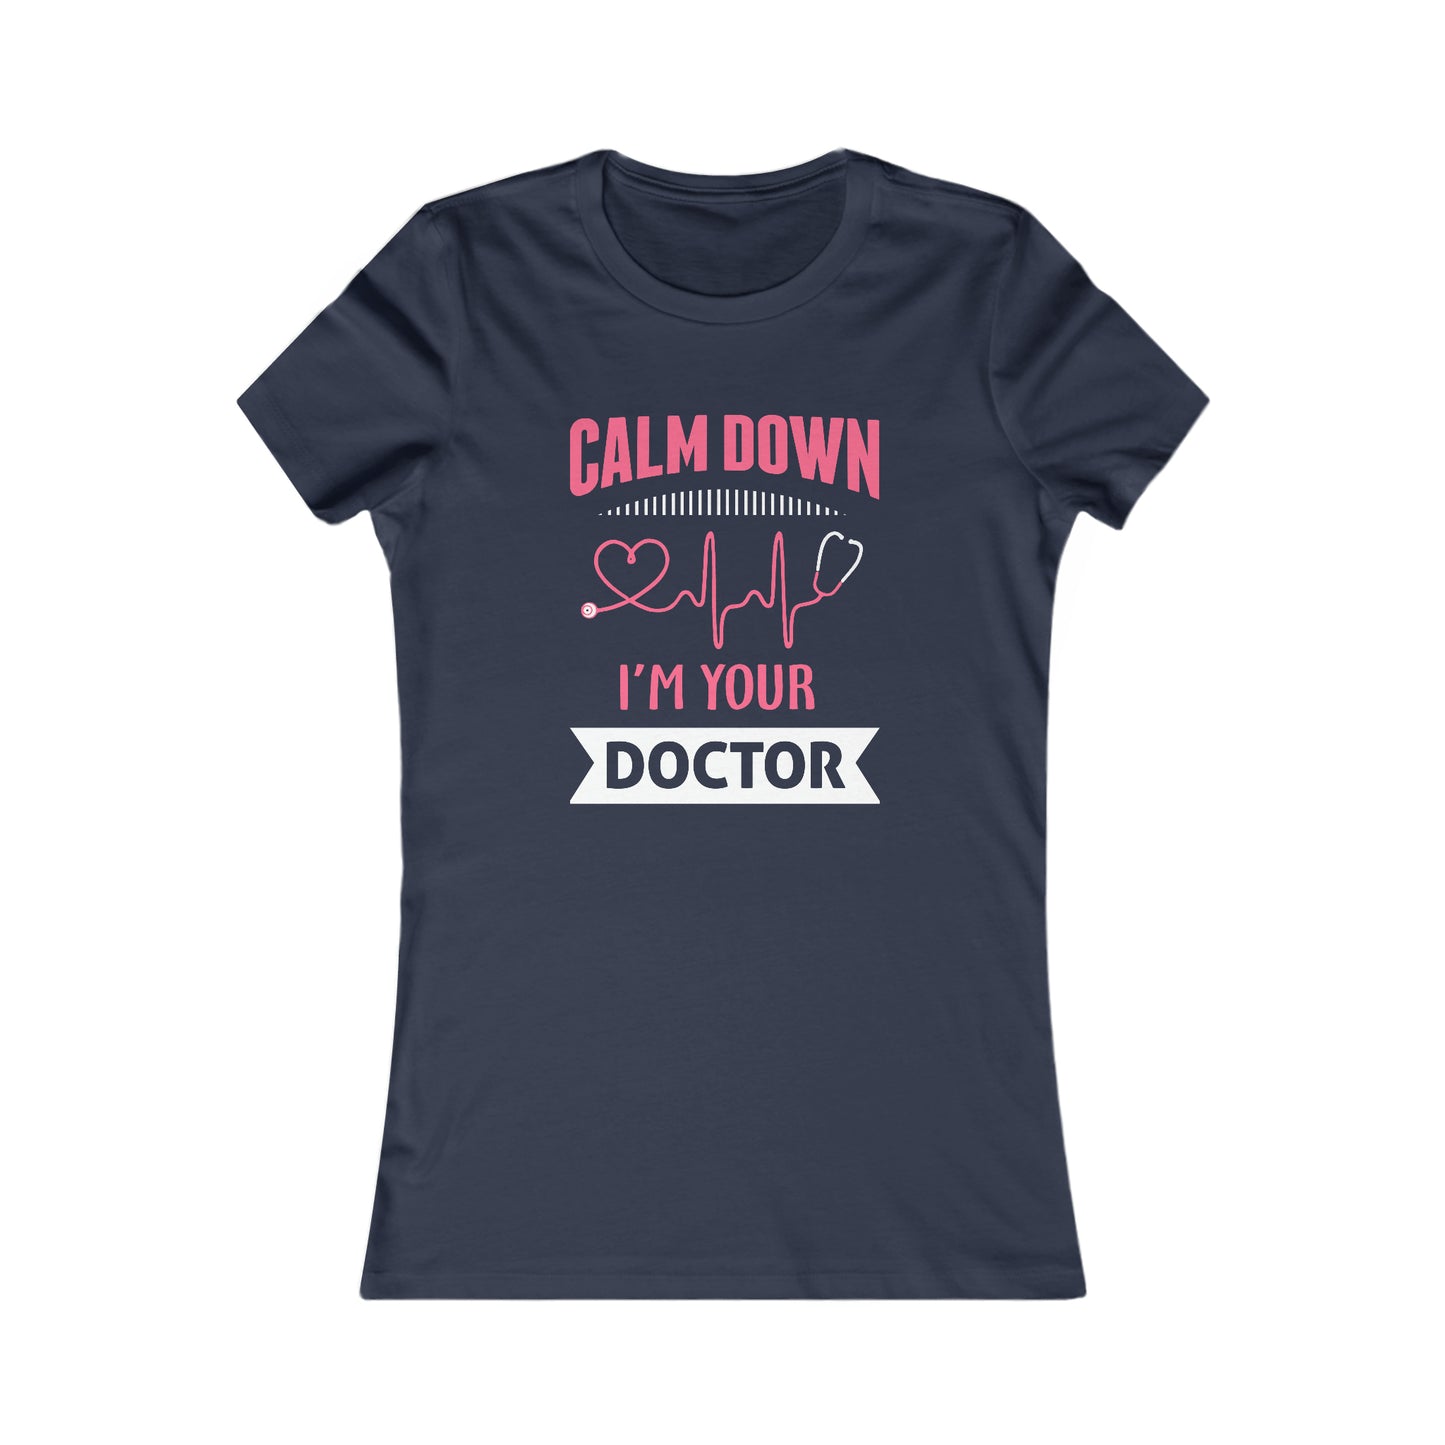 Calm Down I'm Your Doctor Women's Favorite Tee, Doctor shirts, Doctor gift ideas, New Doctor shirt, Future doctor shirt, gift for doctors